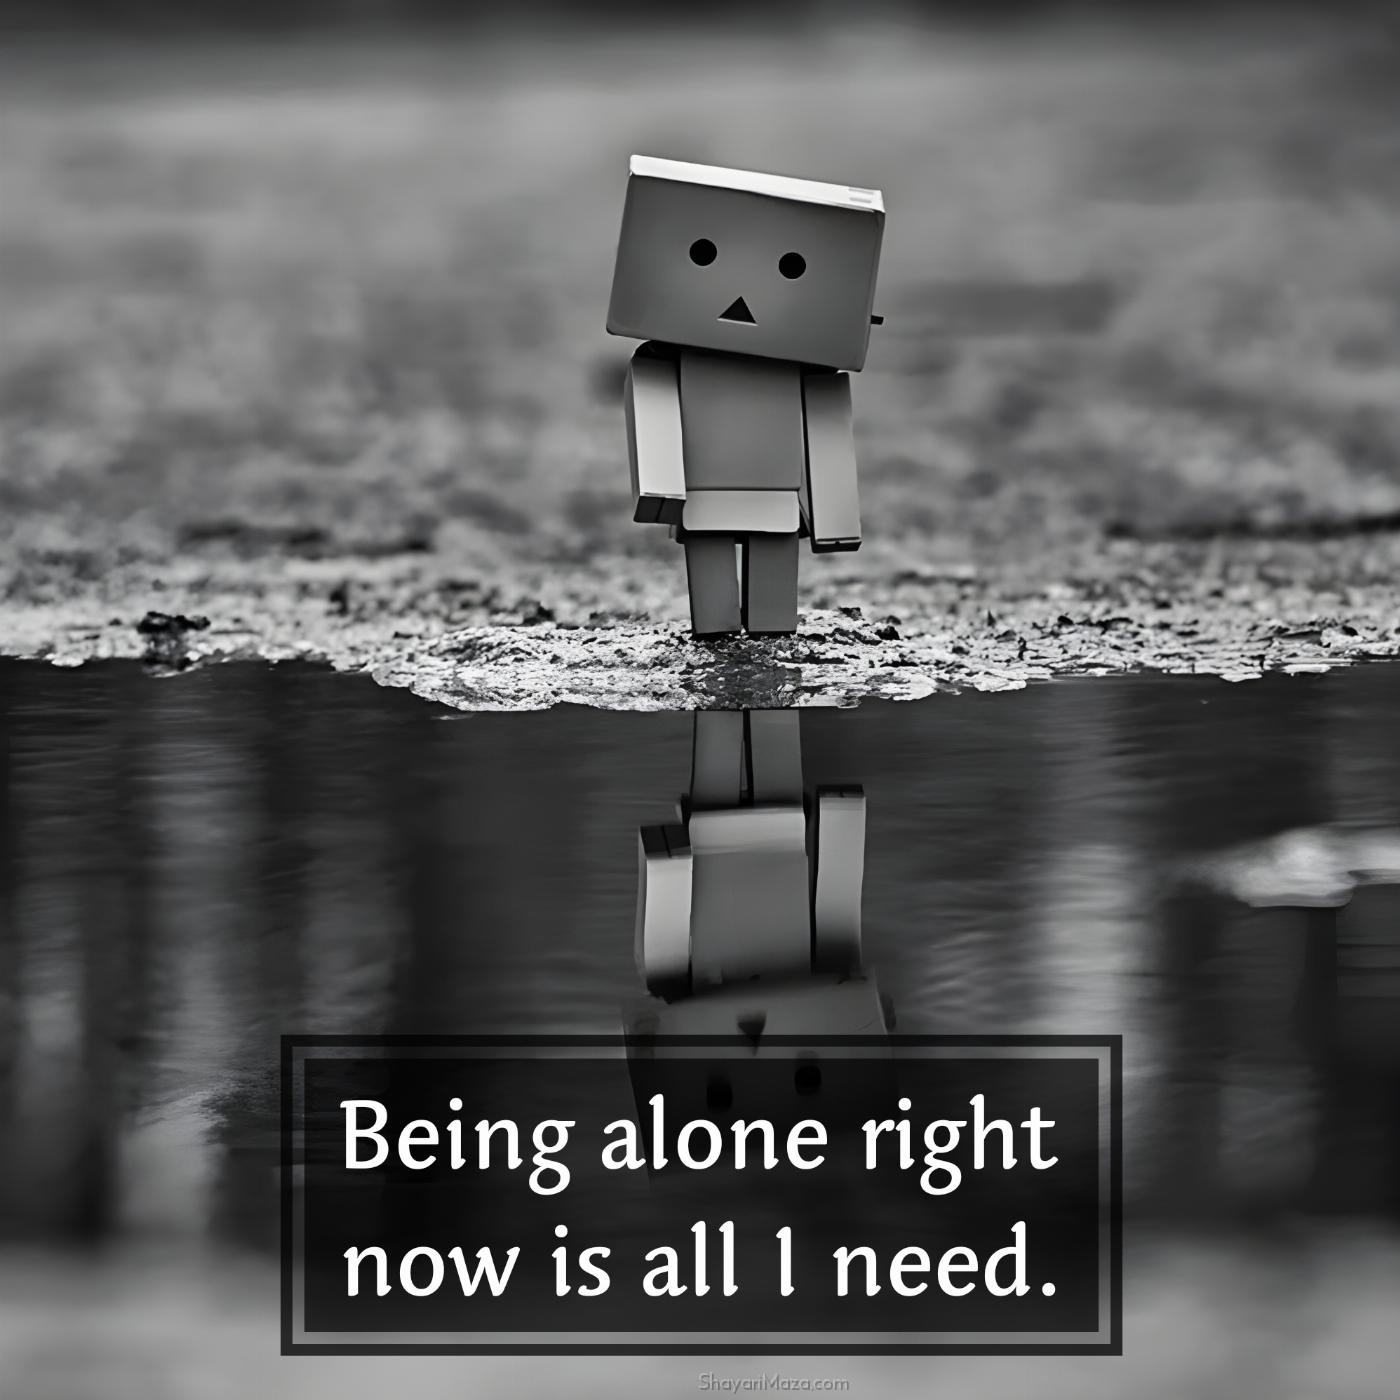 Being alone right now is all I need